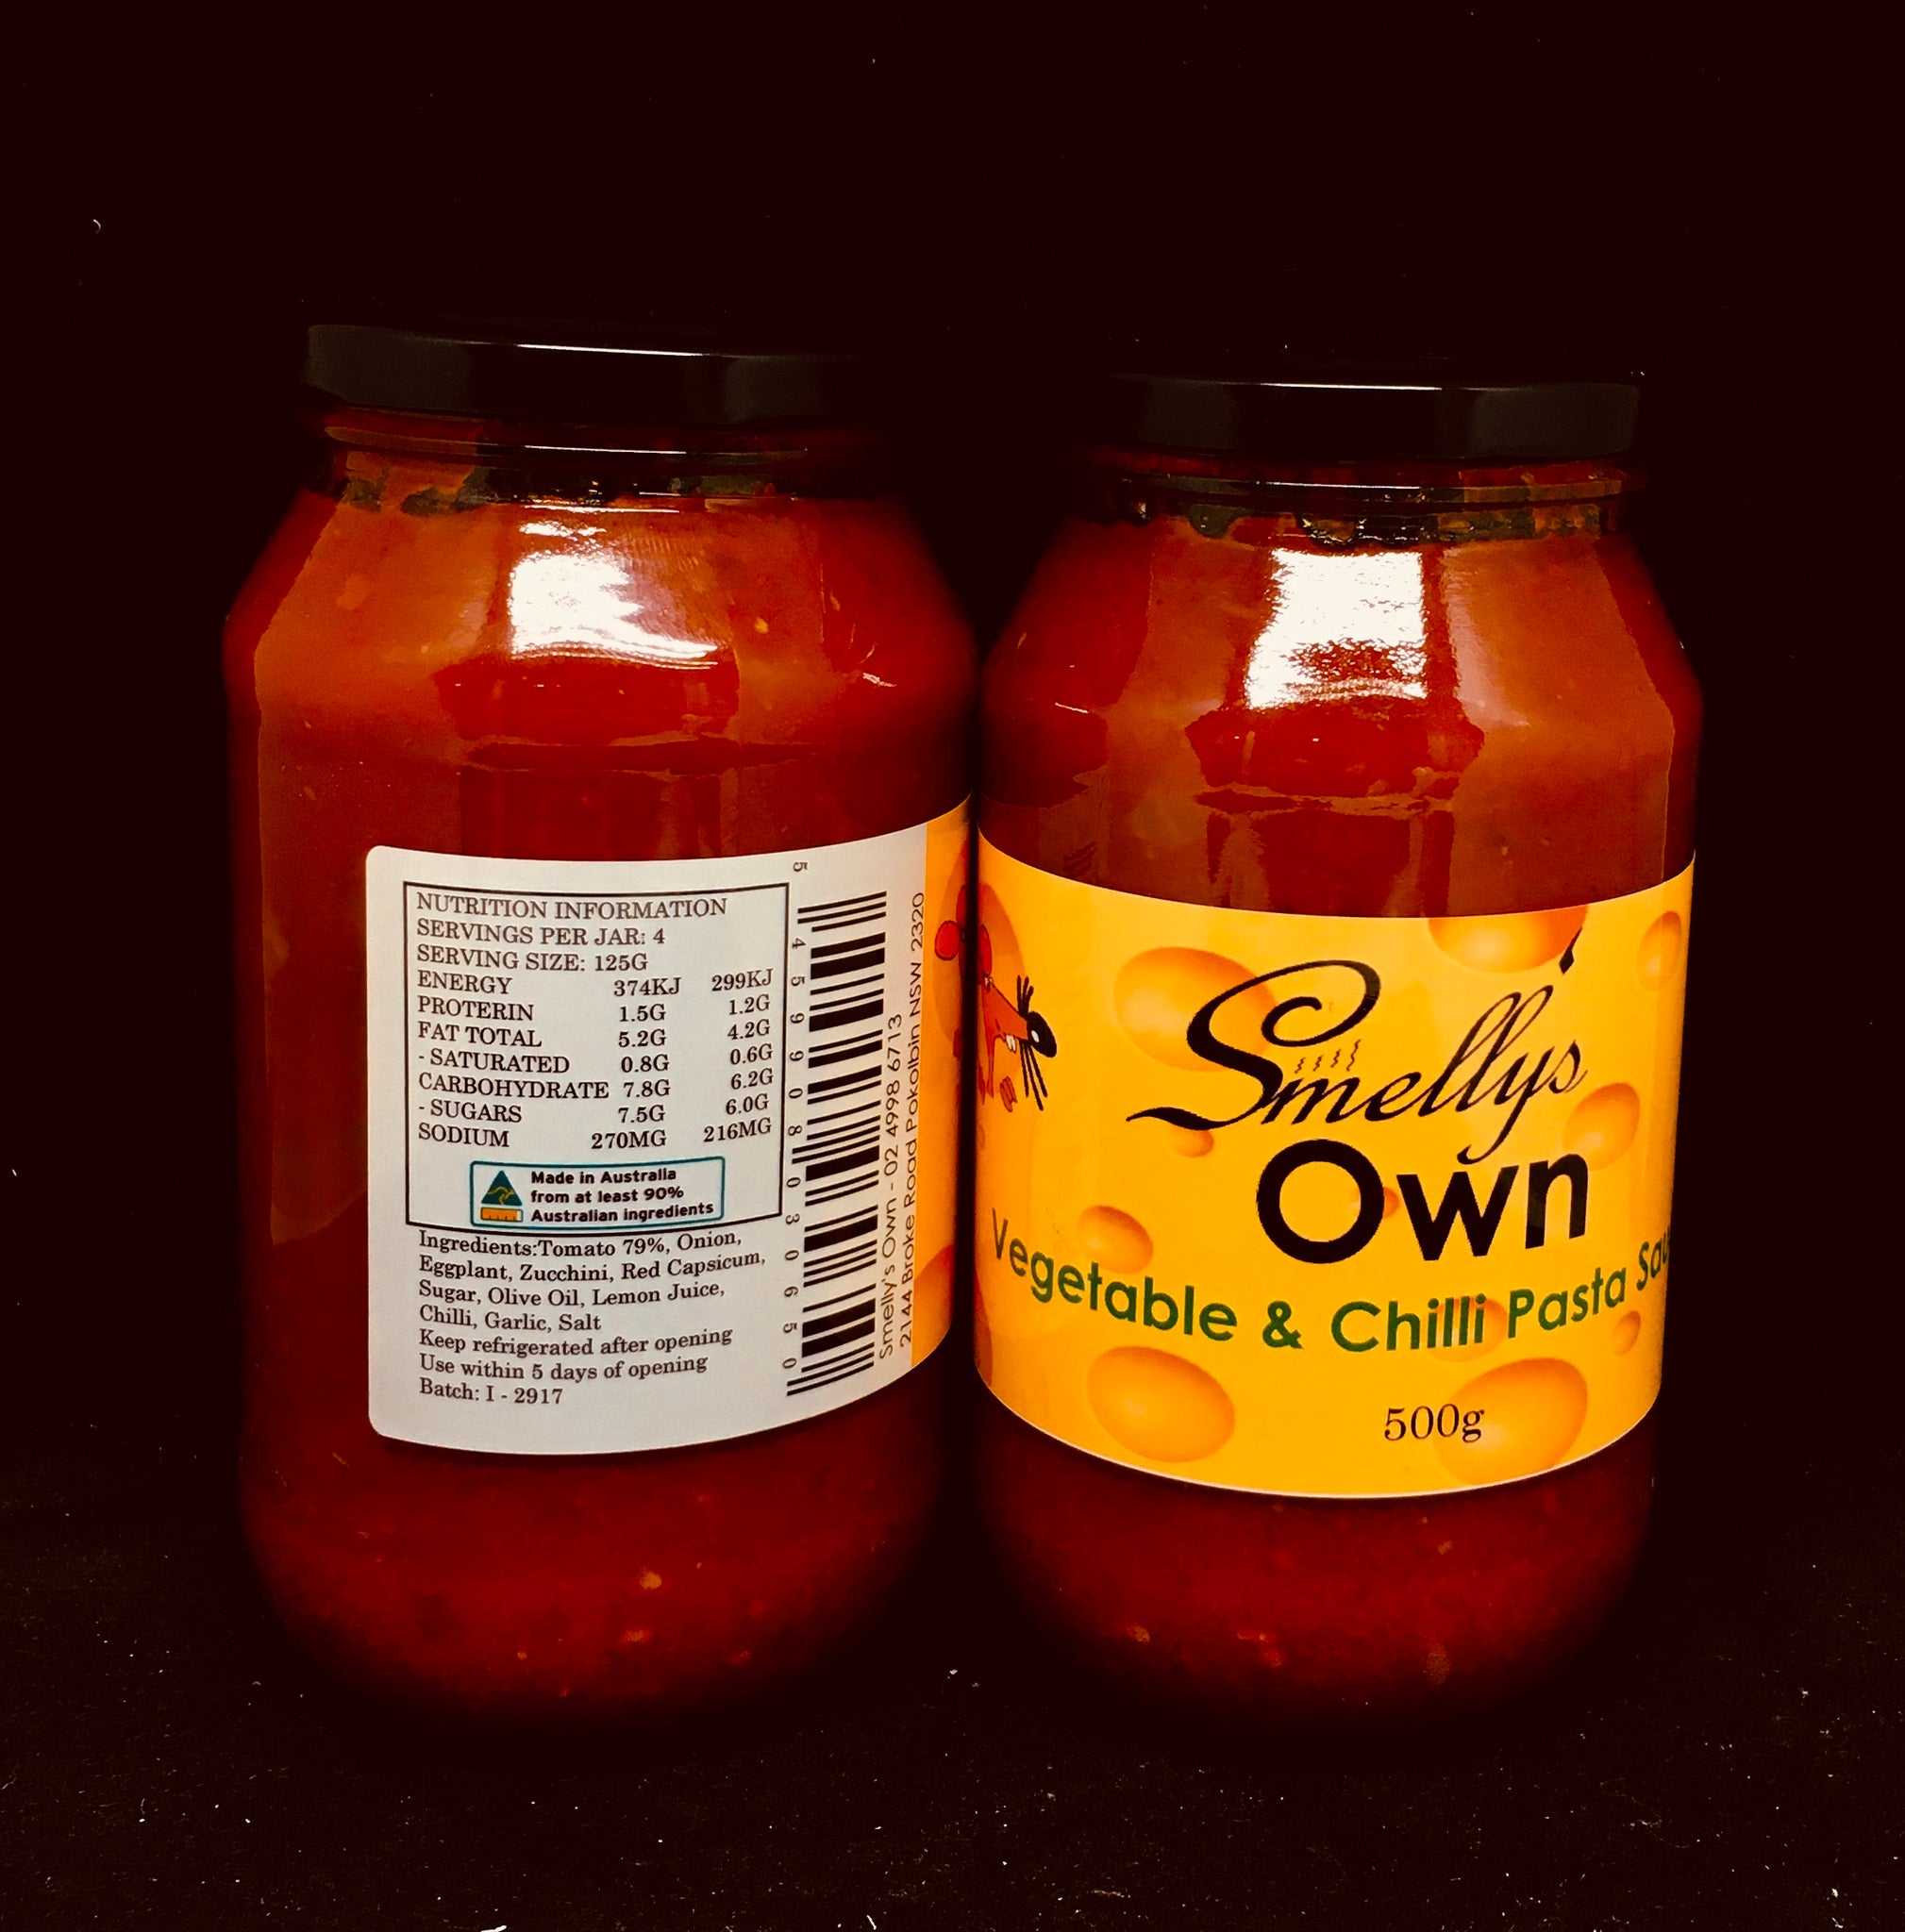 Smelly's Own - Vegetable and Chilli Pasta Sauce